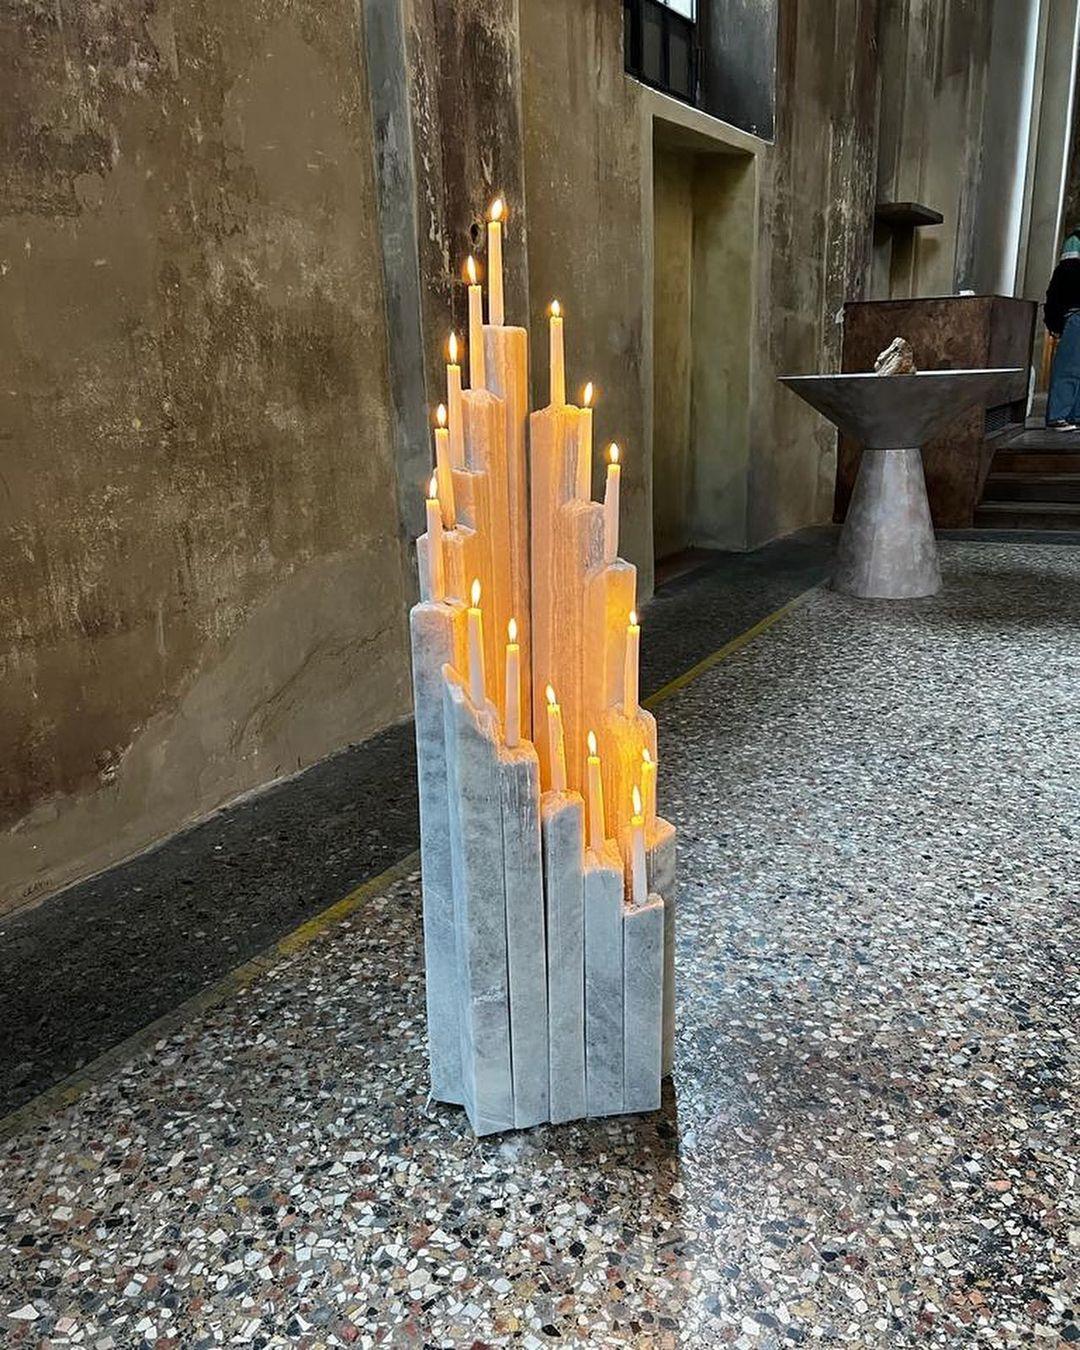 Milan Design Week 2023: An exhibition inspired by 'desacralized' architecture is presented inside an historic church 